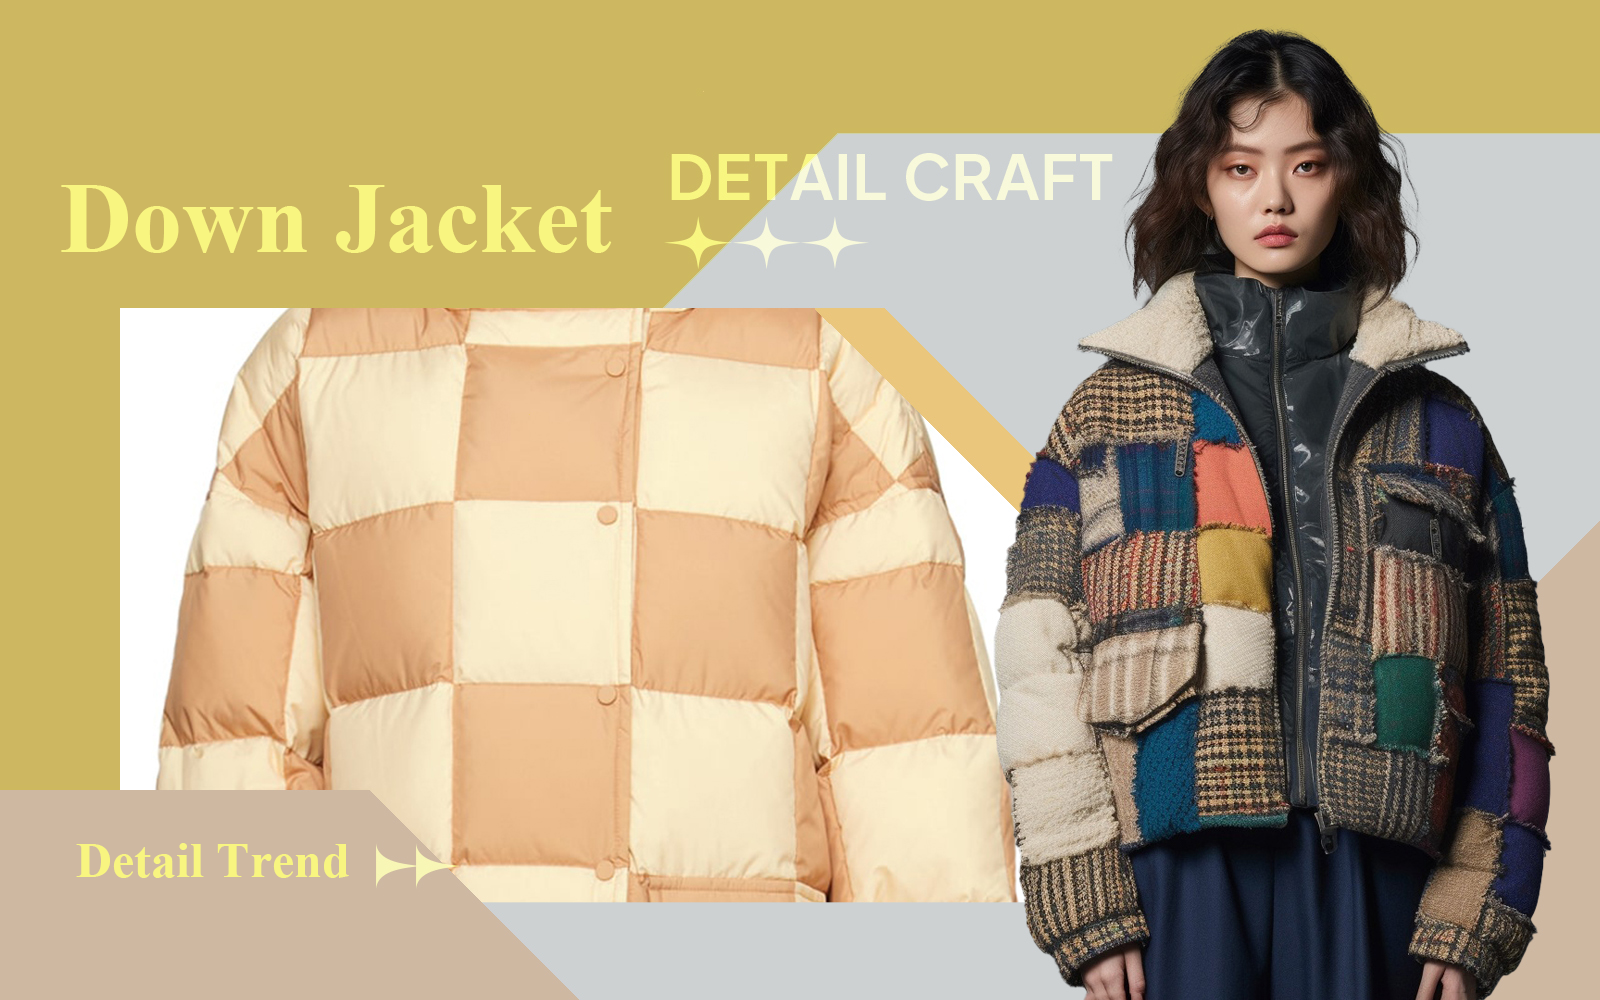 Misplaced Splicing -- The Detail & Craft Trend for Women's Down Jacket